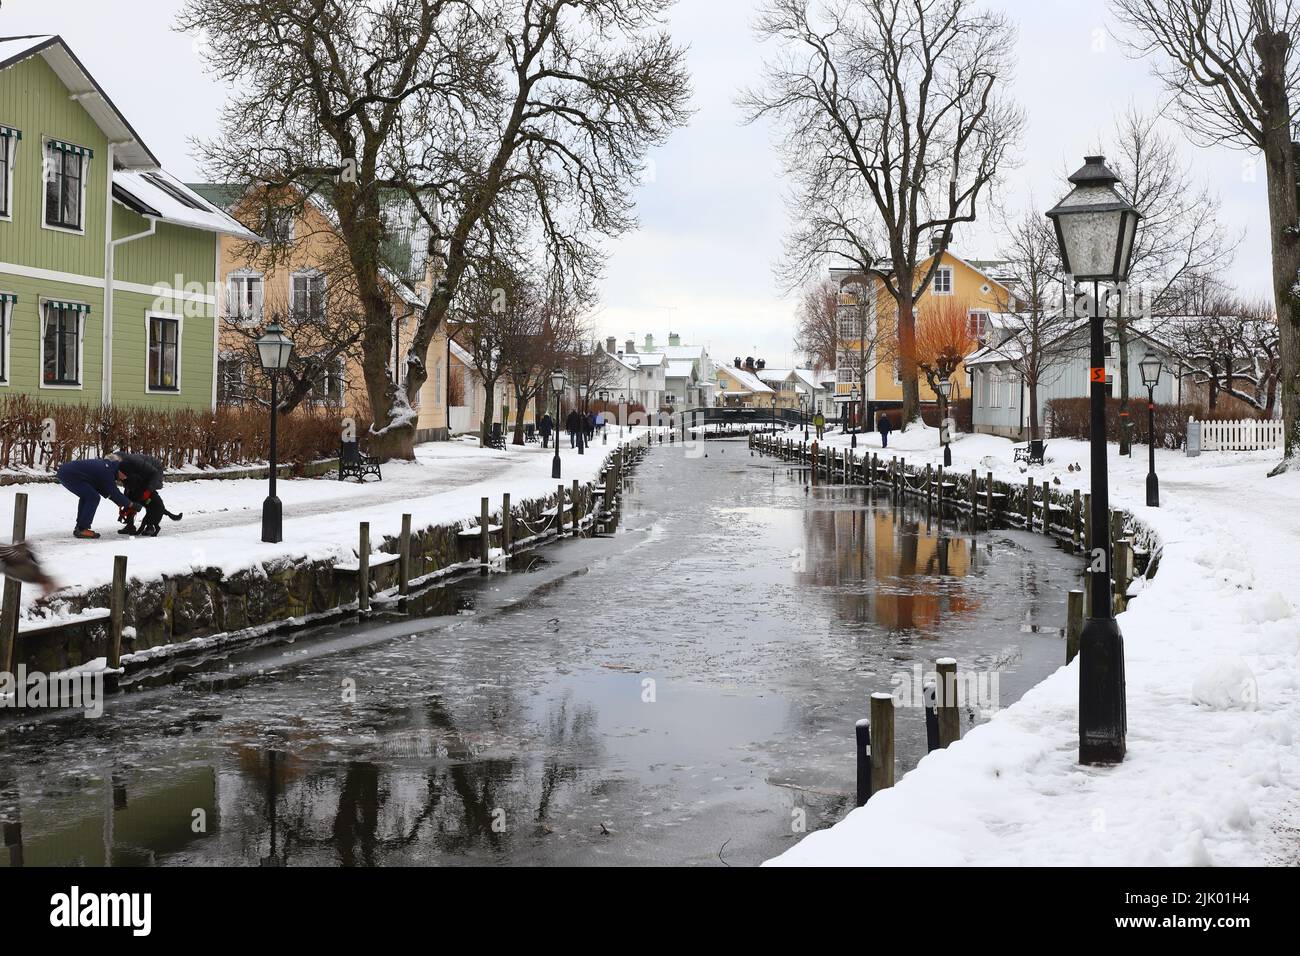 Trosa, Sweden - January 9, 2022: View of the winding trosa river through the town. Stock Photo